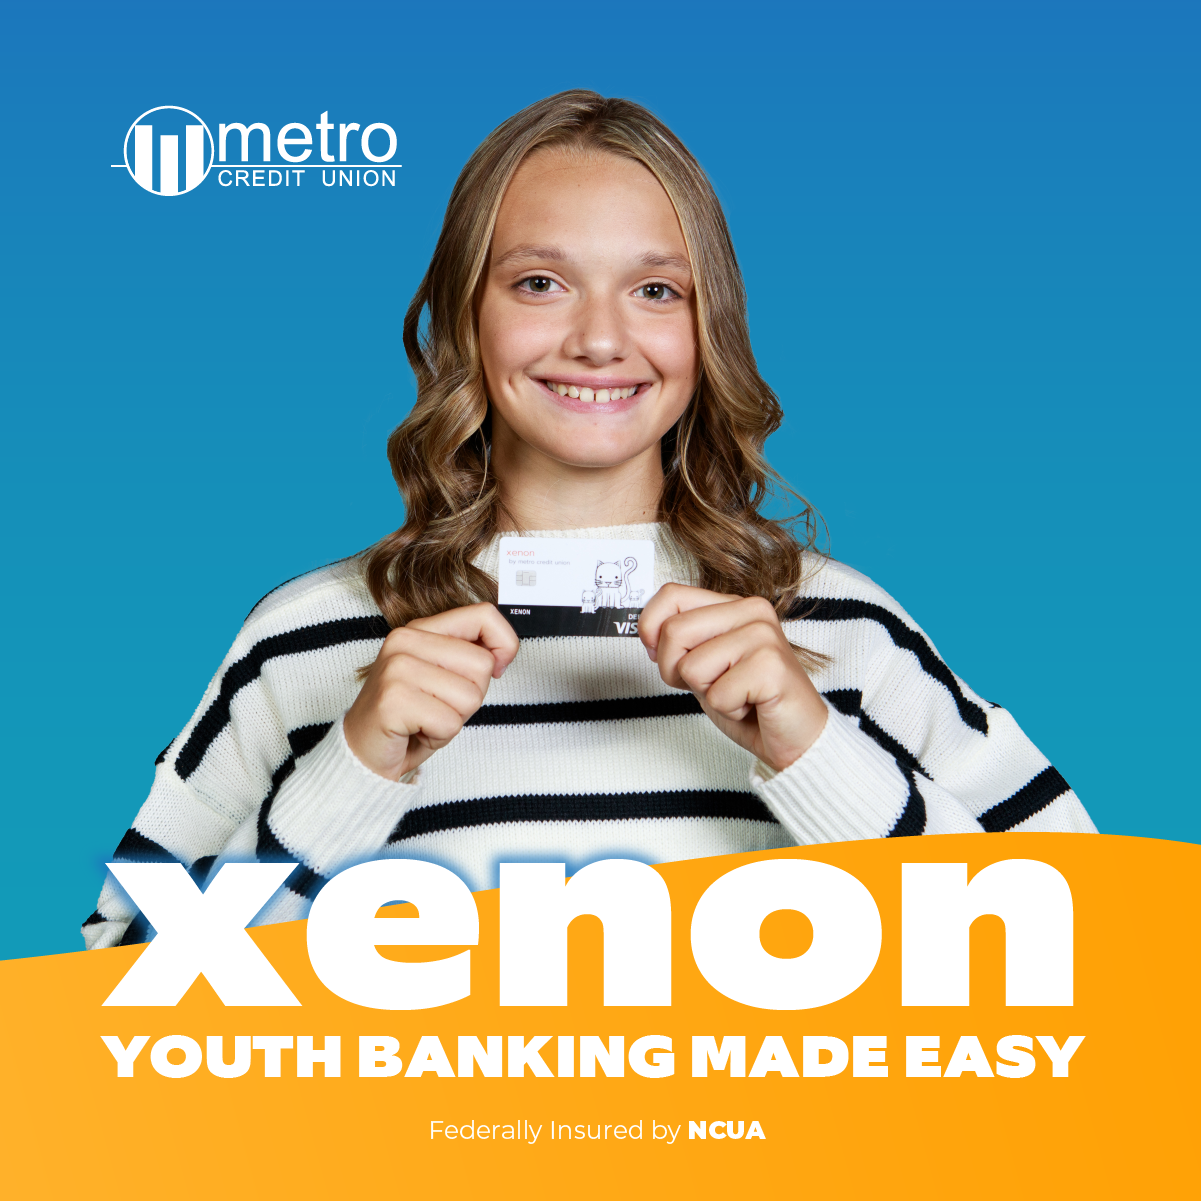 Xenon is the perfect checking account for kids providing them with a debit card & a mobile app to manage their bank account.